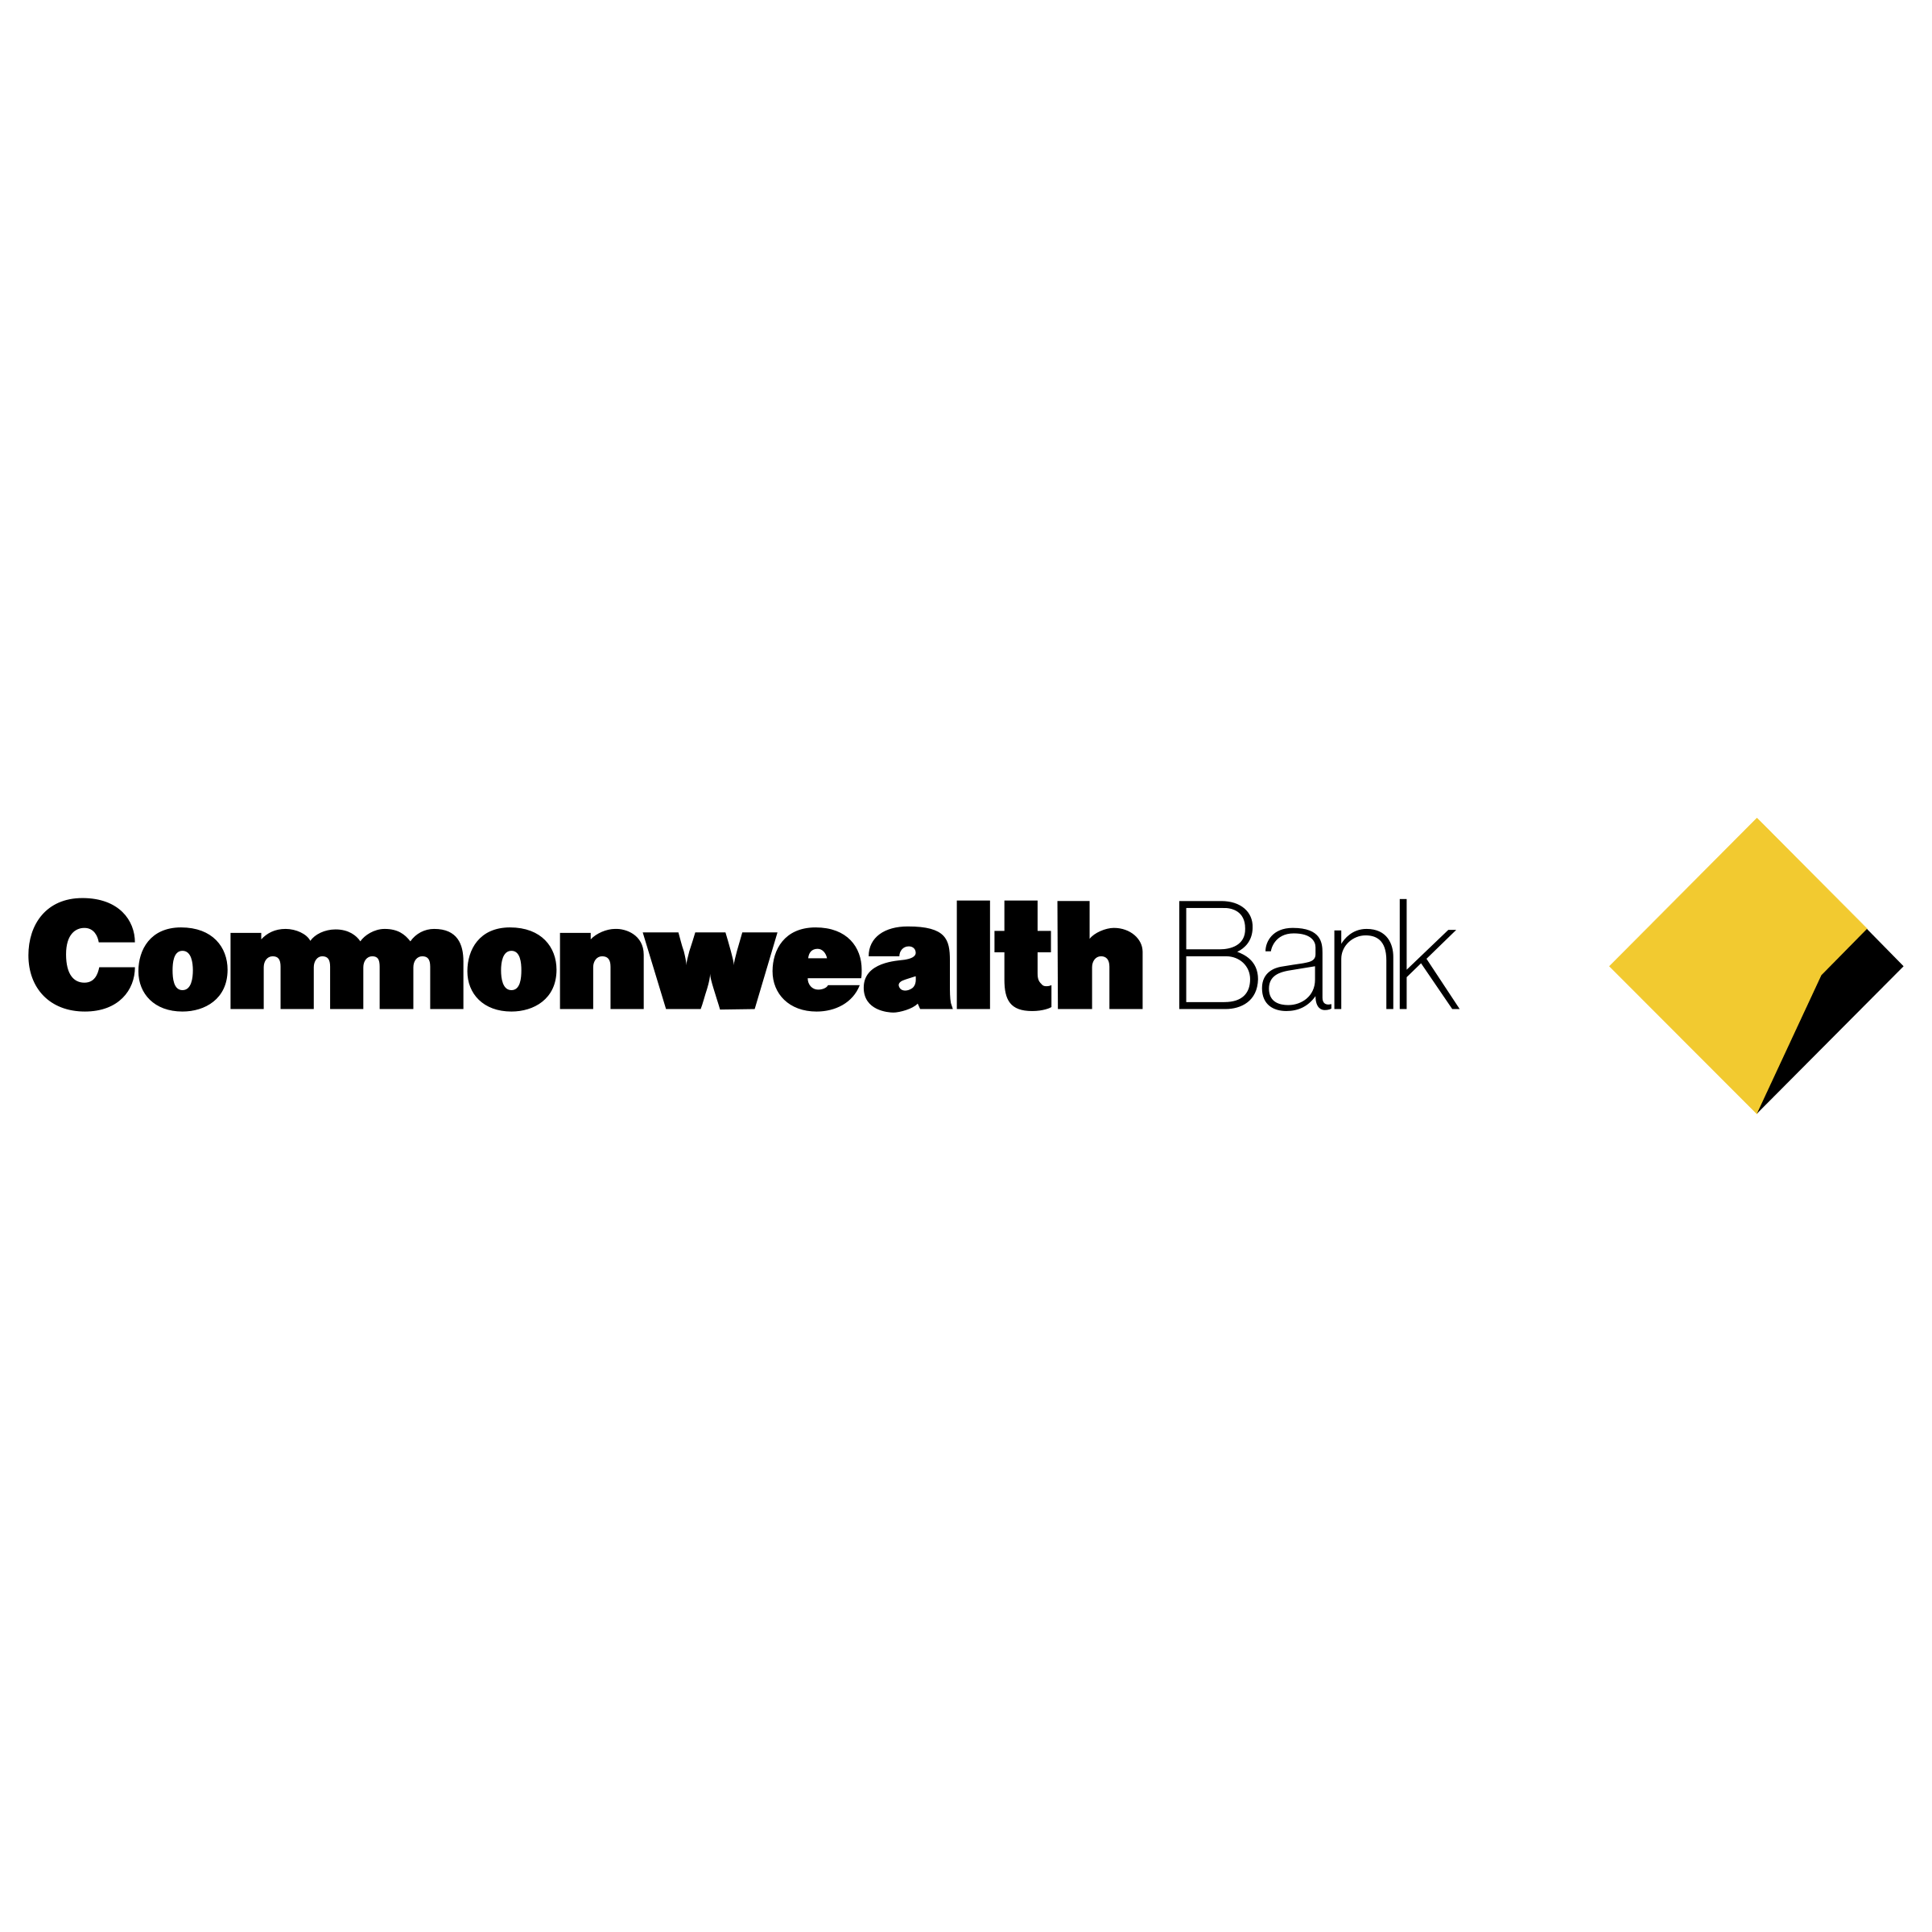 Commonwealth Logo - Commonwealth Bank Logo PNG Transparent & SVG Vector